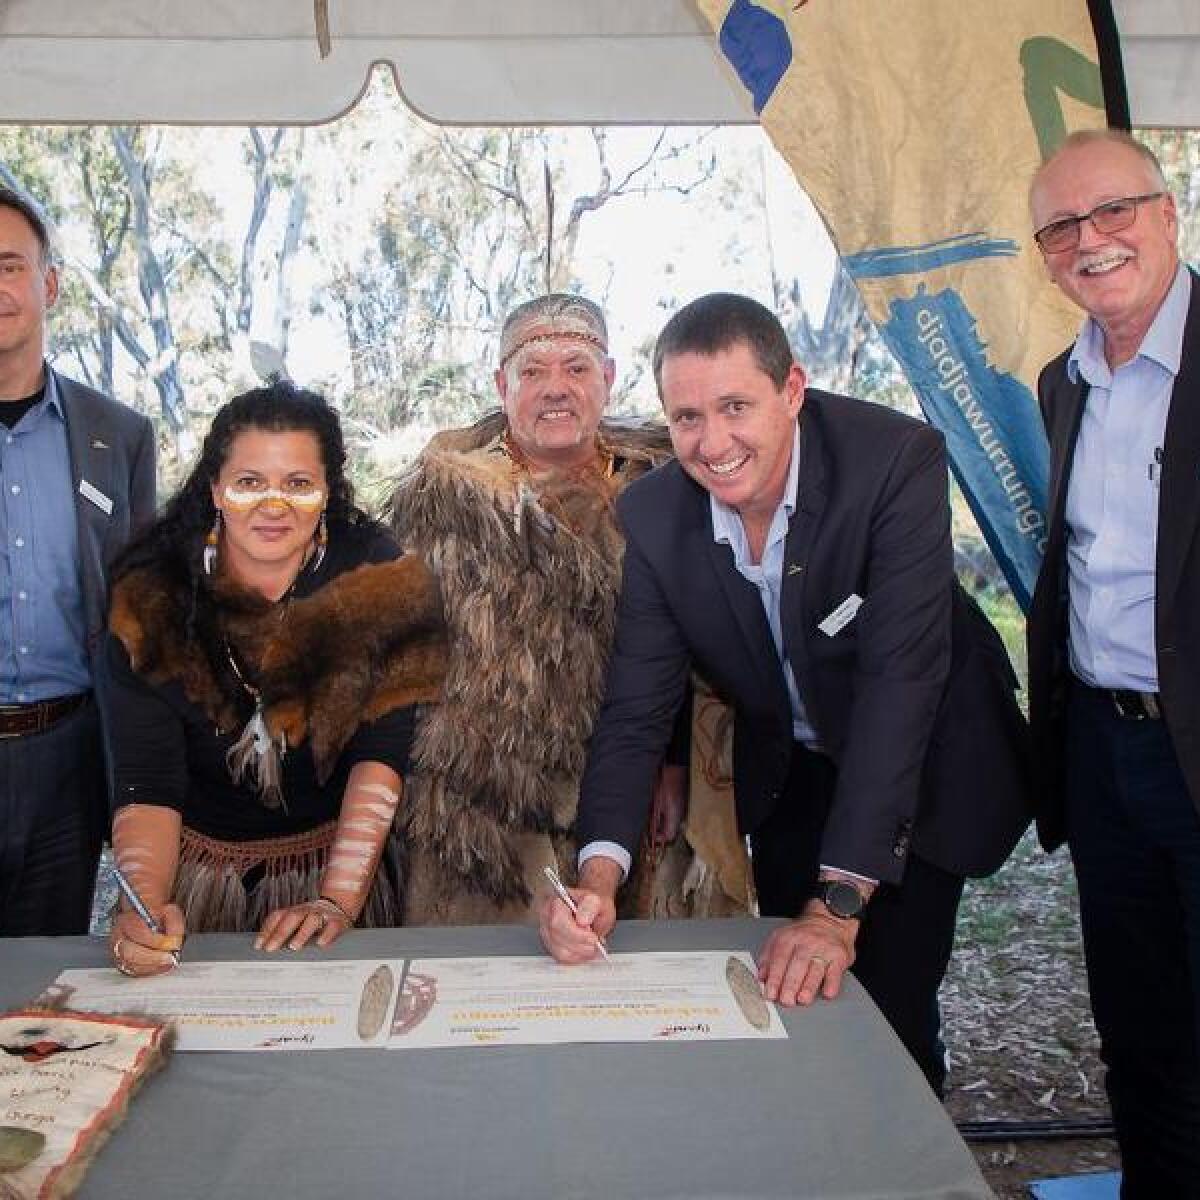 The Dja Dja Wurrung people and Agnico Eagle sign the mining agreement